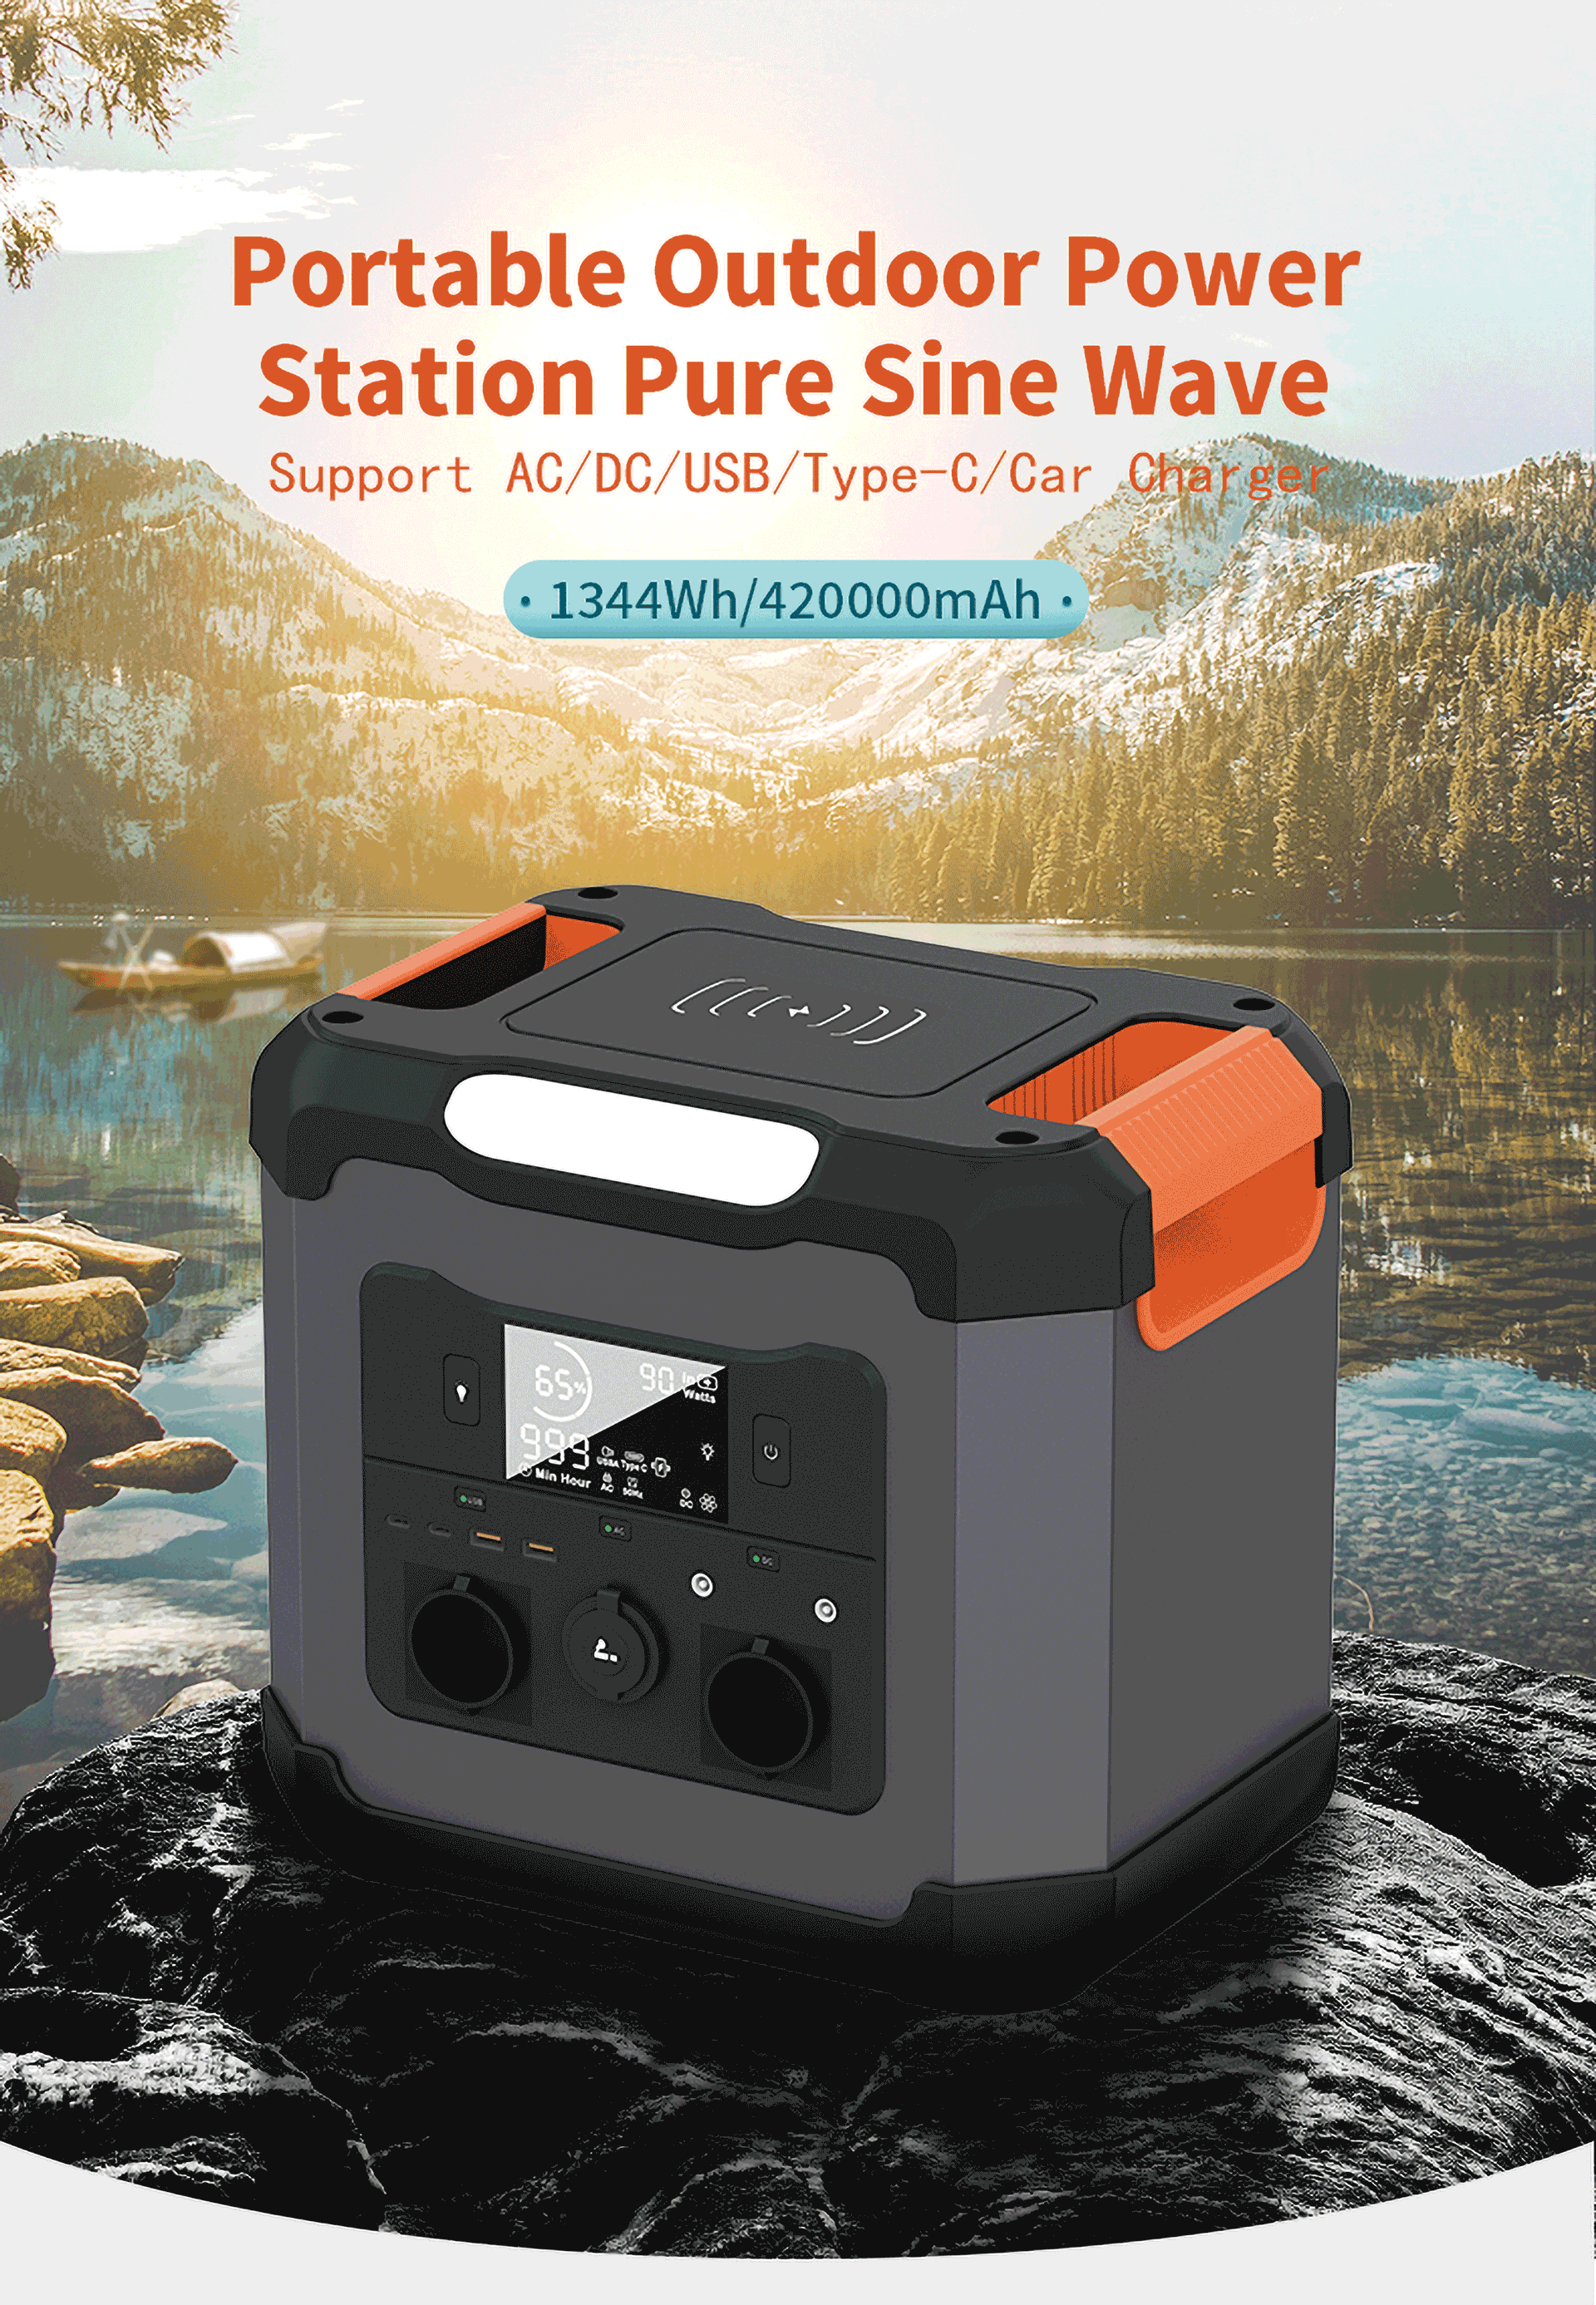 A&S Power 110V 220V Outdoor multi-function Solar Portable Power Station Generator 1500W For Camping